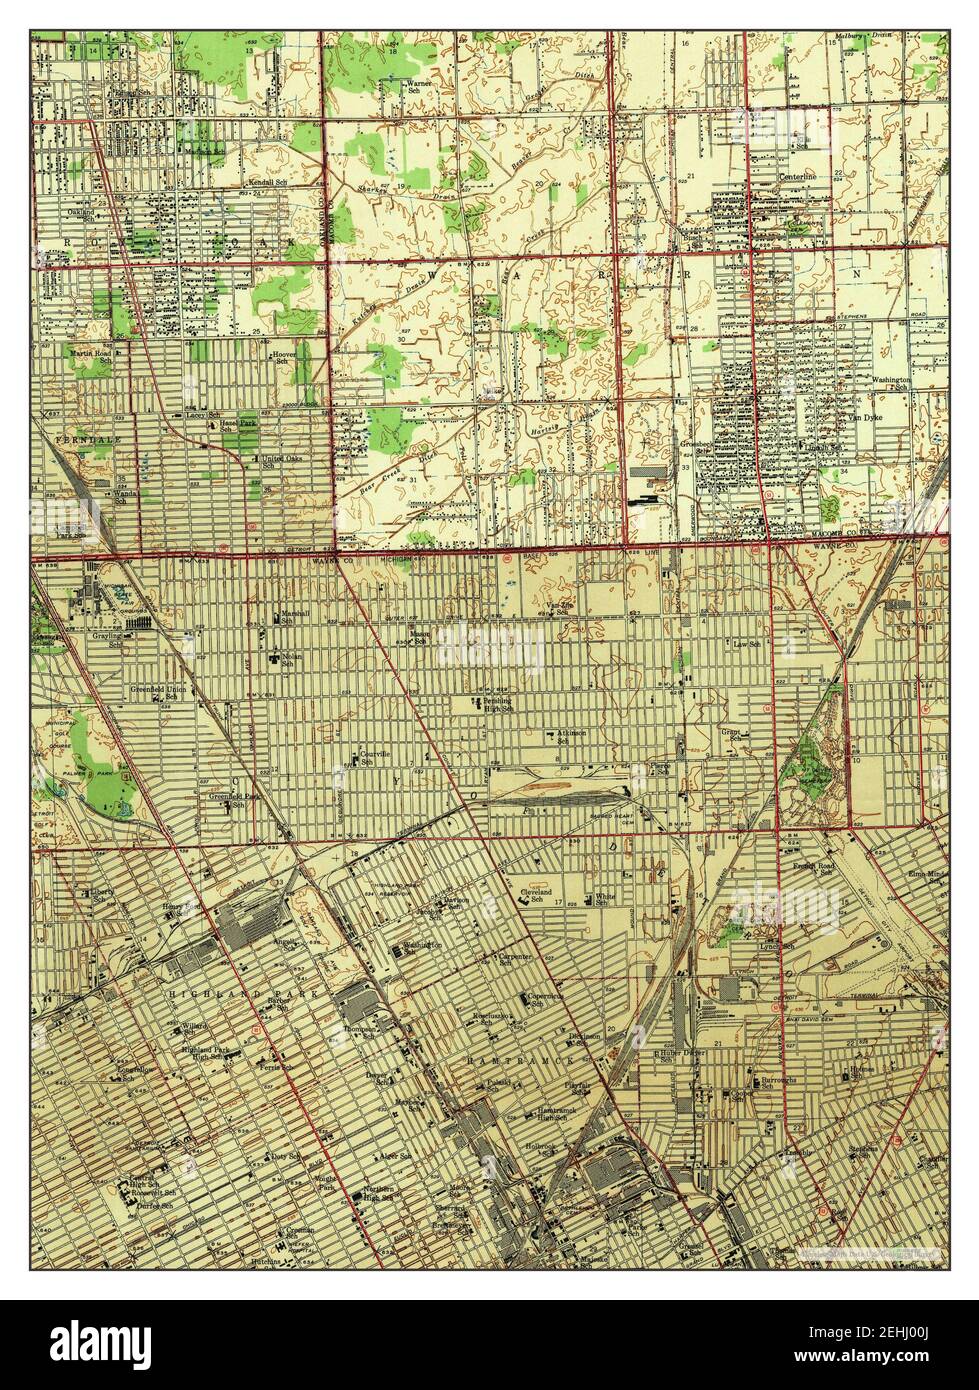 Highland Park Michigan Map 1940 124000 United States Of America By Timeless Maps Data Us Geological Survey 2EHJ00J 